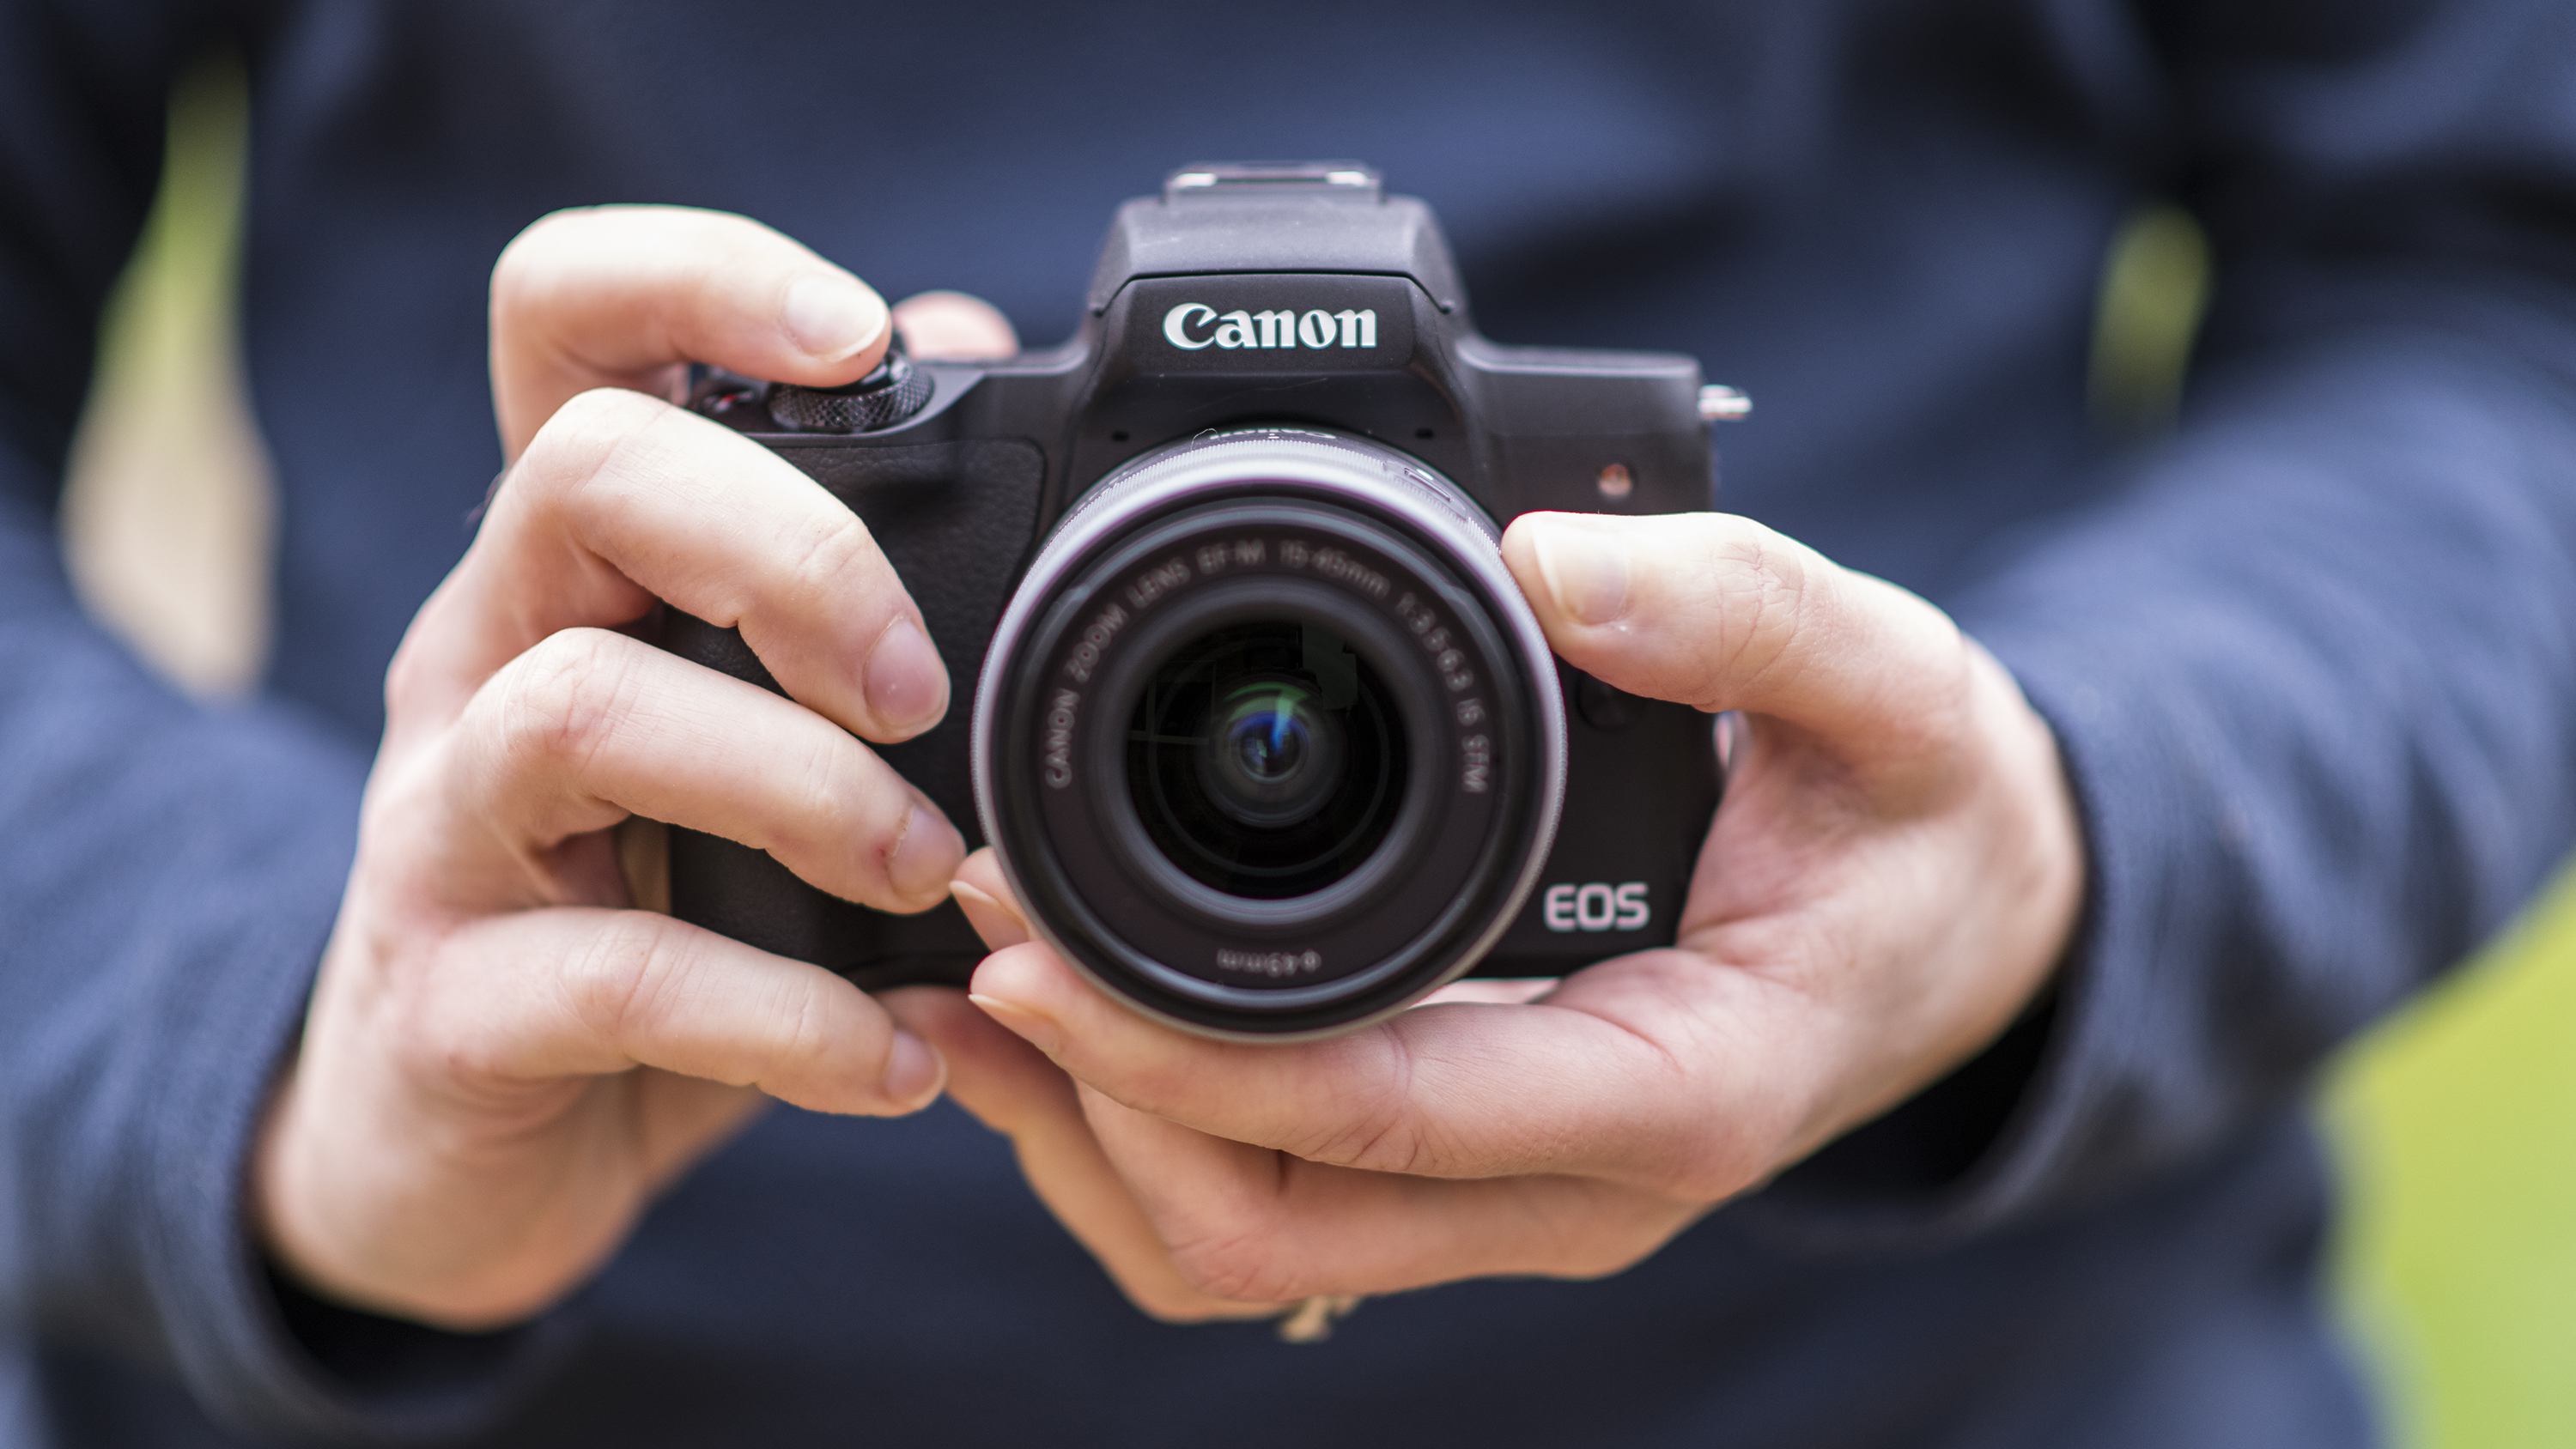 and image quality - Performance and quality - Canon EOS M50 review Page 3 | TechRadar